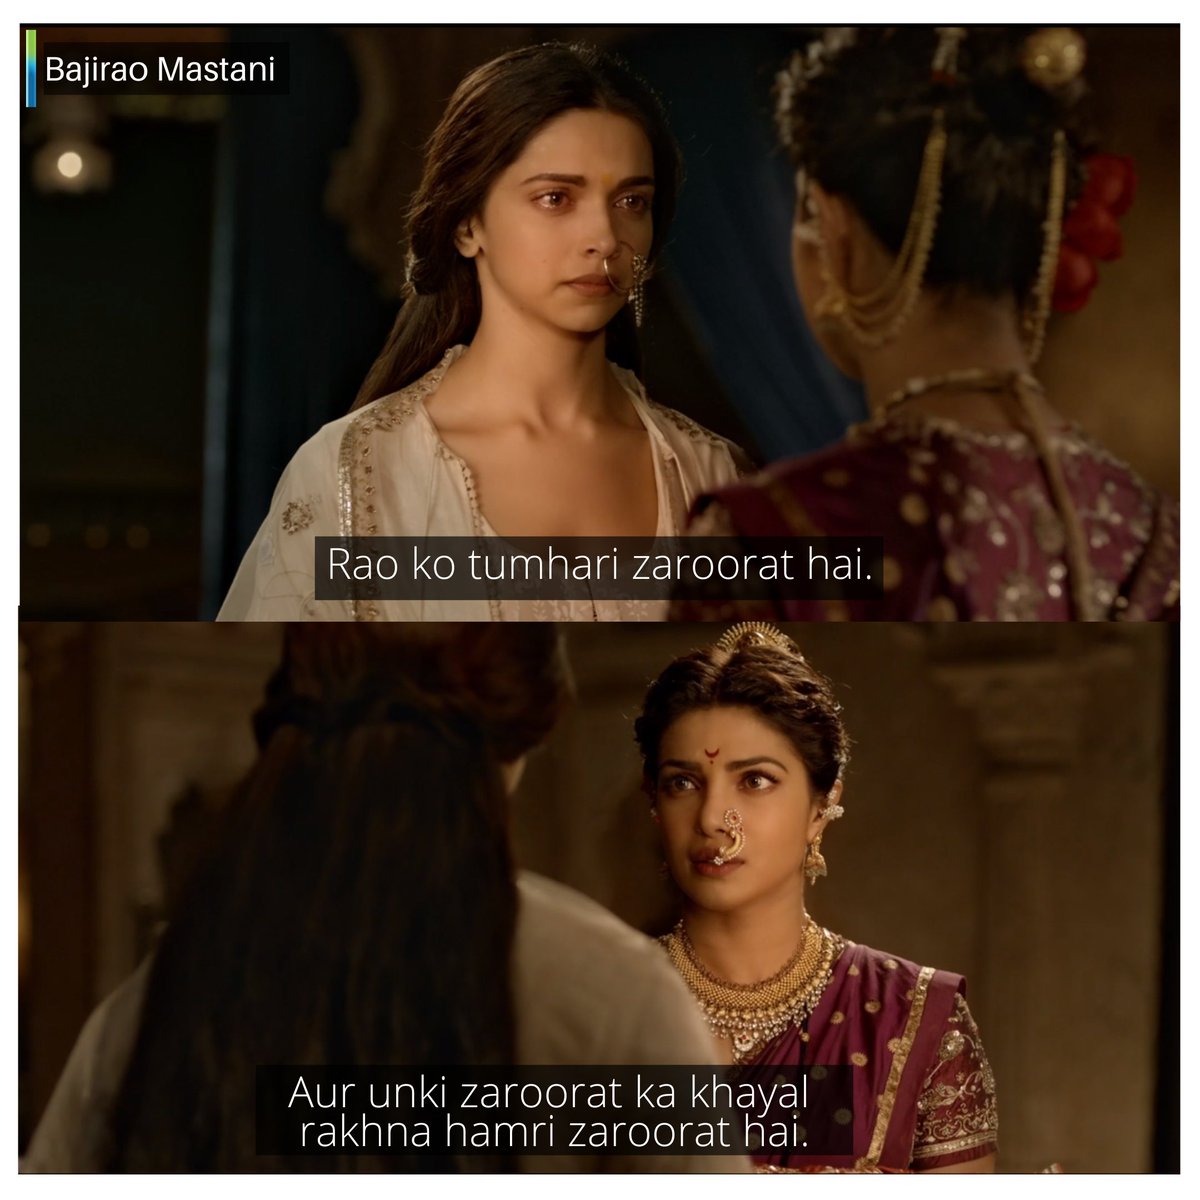 In elegant navvaris, flowers in her hair and tears brimming in her kohl-rimmed eyes,  @priyankachopra makes a heartbreakingly beautiful Kashi—again and again choosing not what she 𝑤𝑎𝑛𝑡𝑠 but what the man she loves 𝑛𝑒𝑒𝑑𝑠.(3/10)